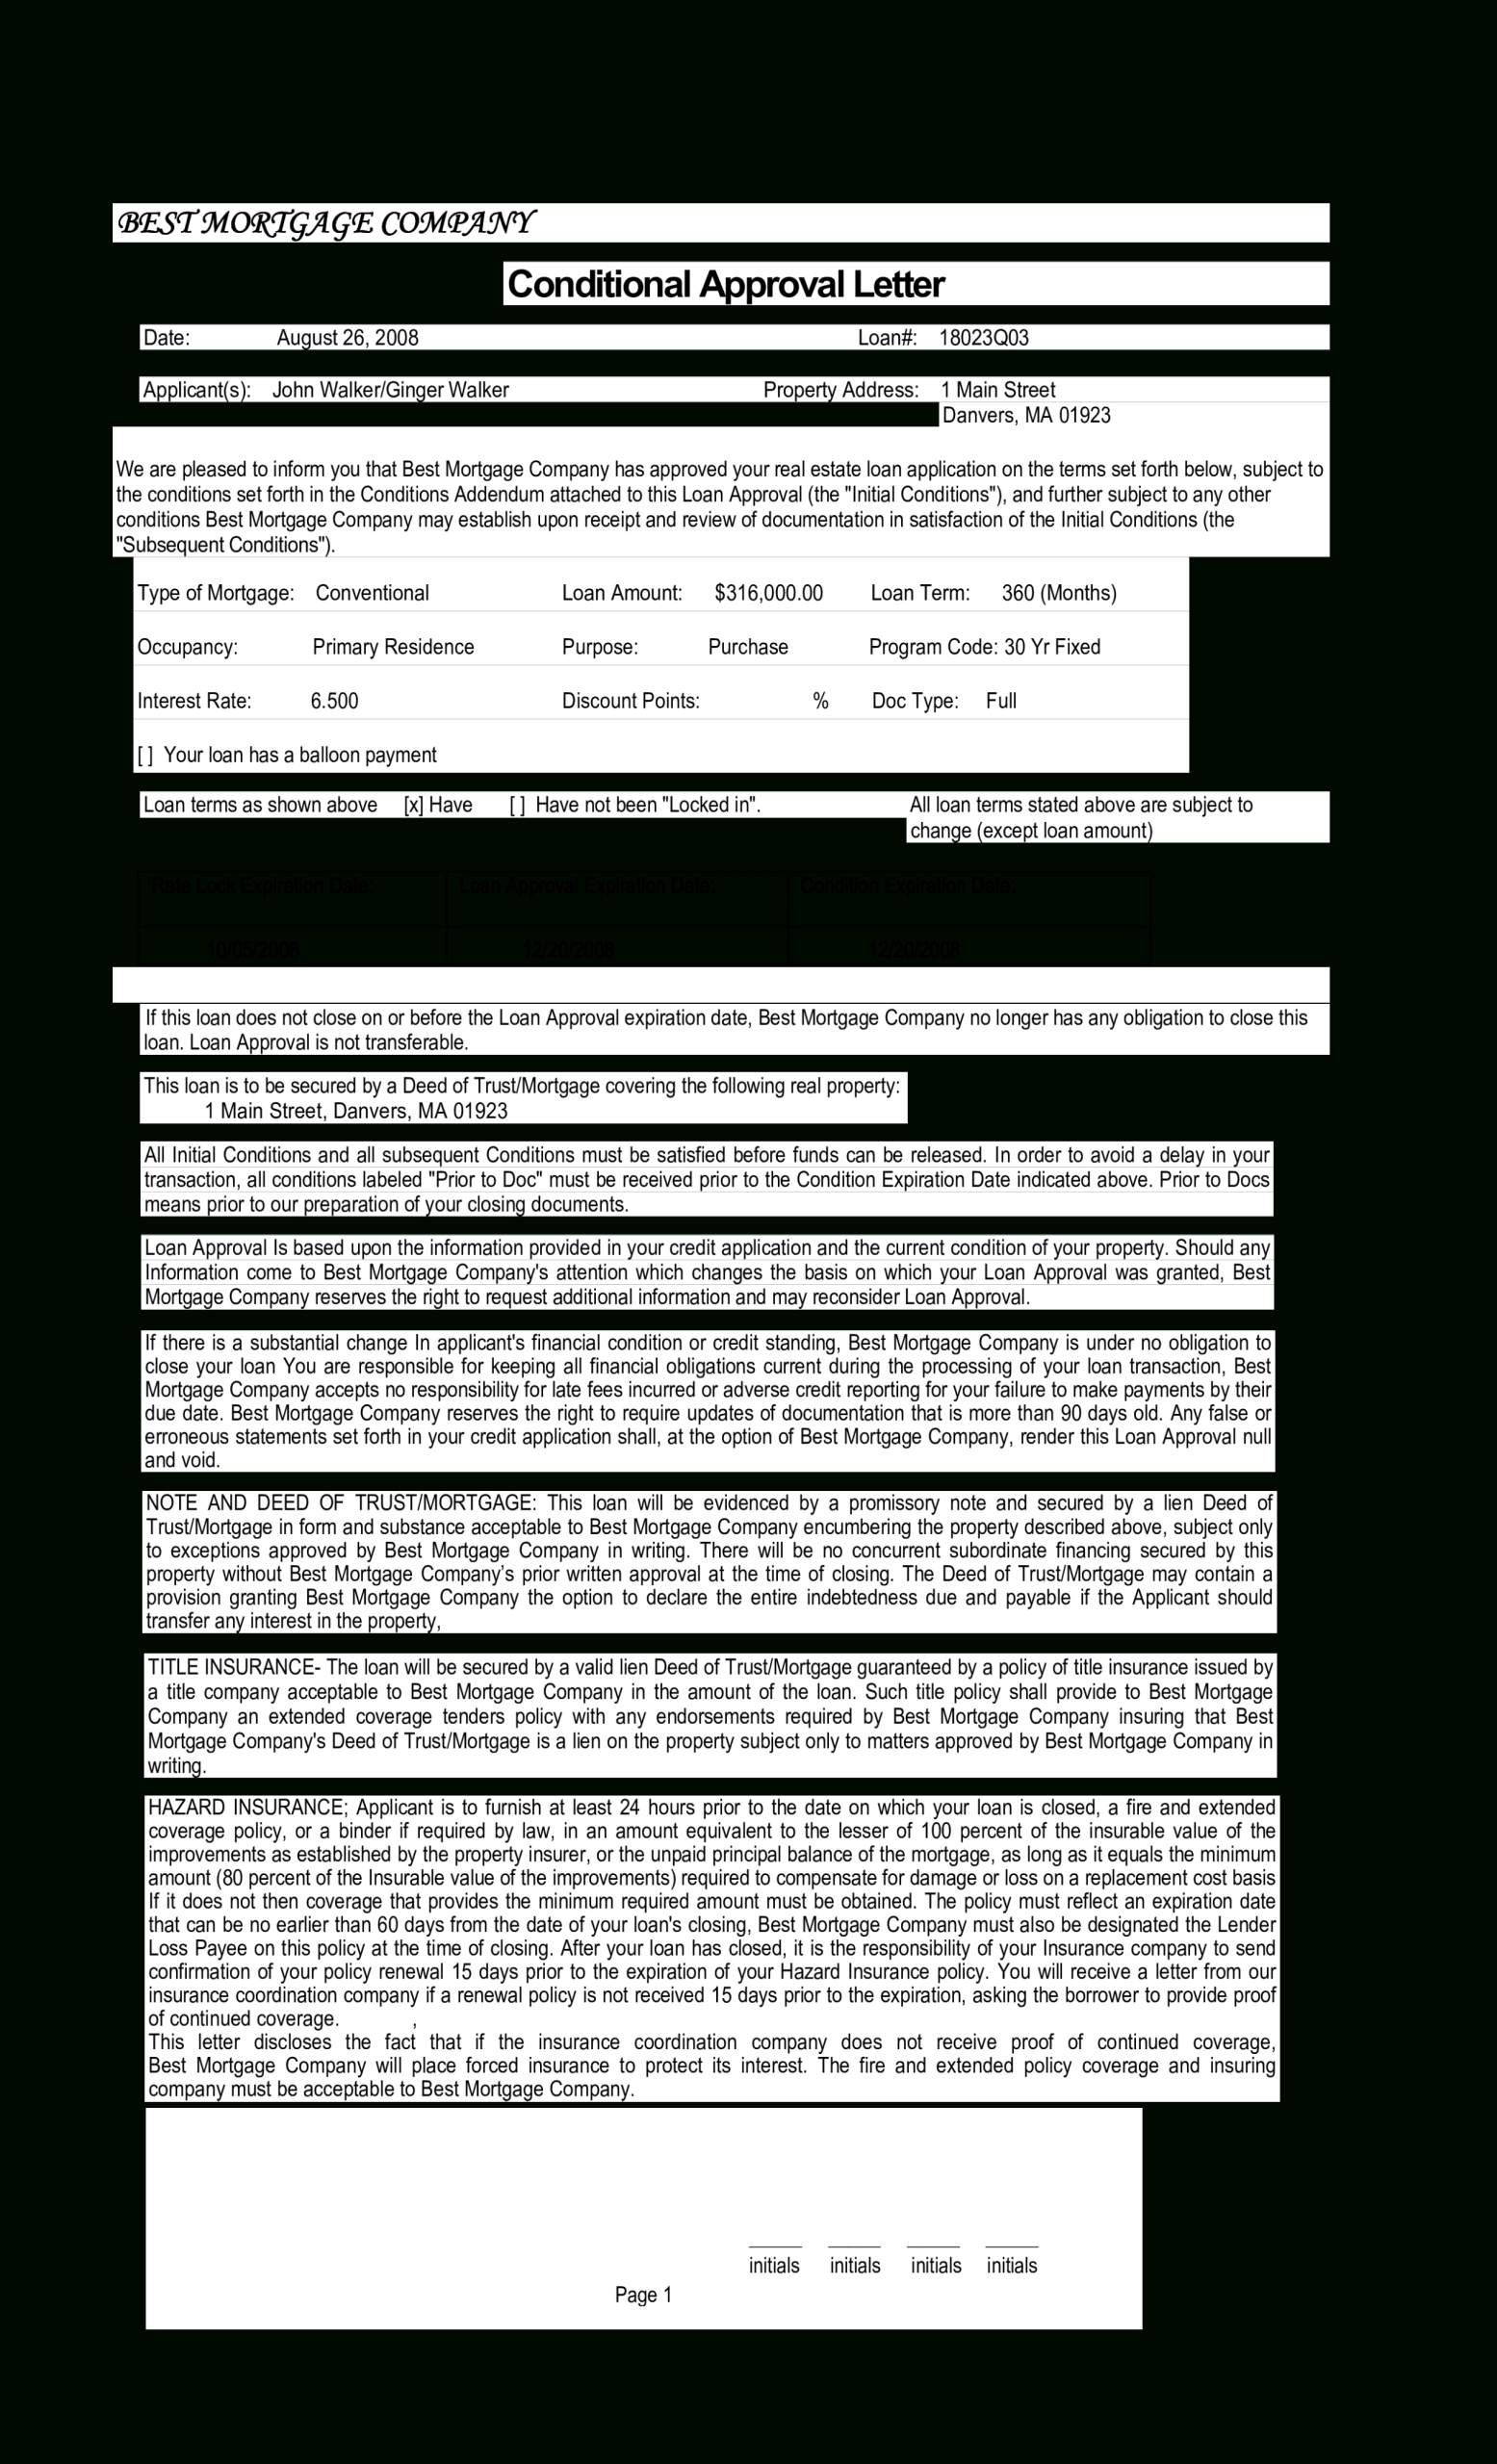 Mortgage Pre Approval Letter | Templates At Allbusinesstemplates Within Mortgage Letter Templates